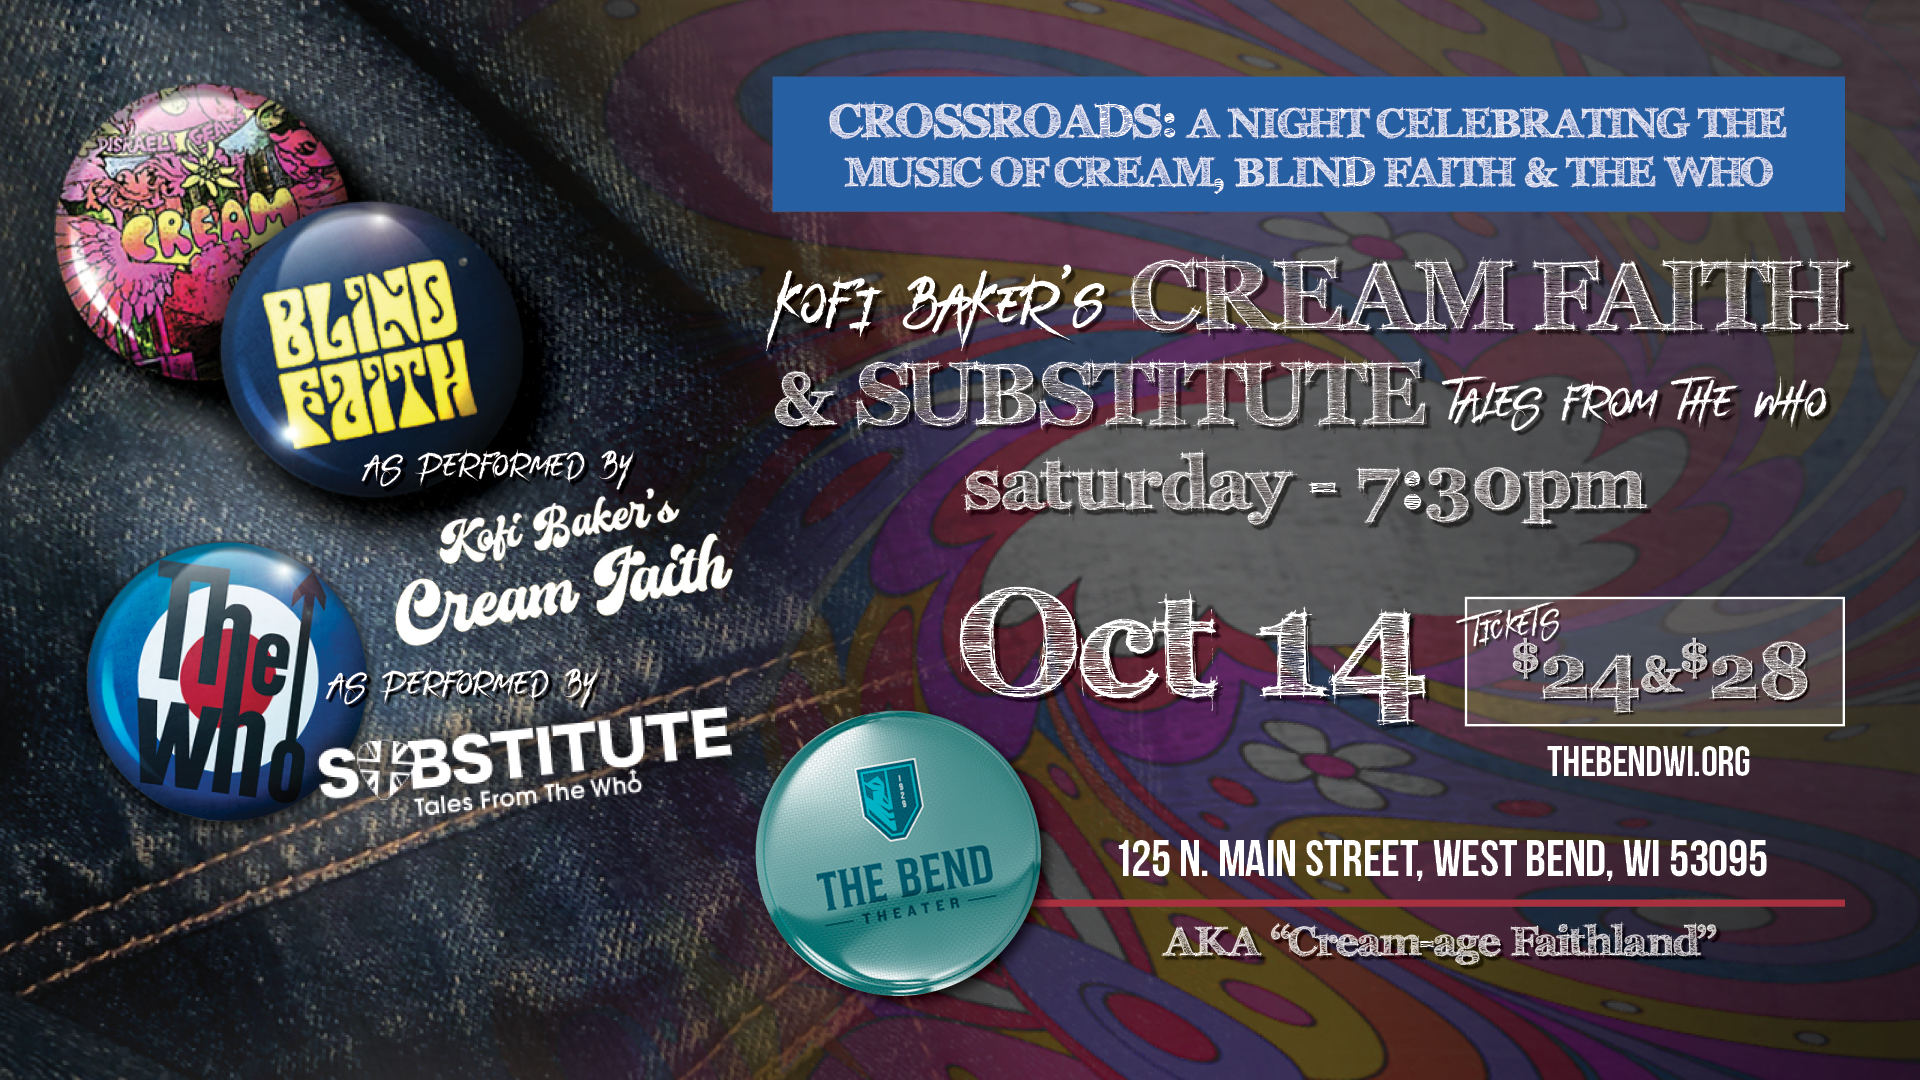 An Evening of Classic Rock - 2 Legendary Tributes: Kofi Baker's Cream Faith & Substitute: Tales from The Who